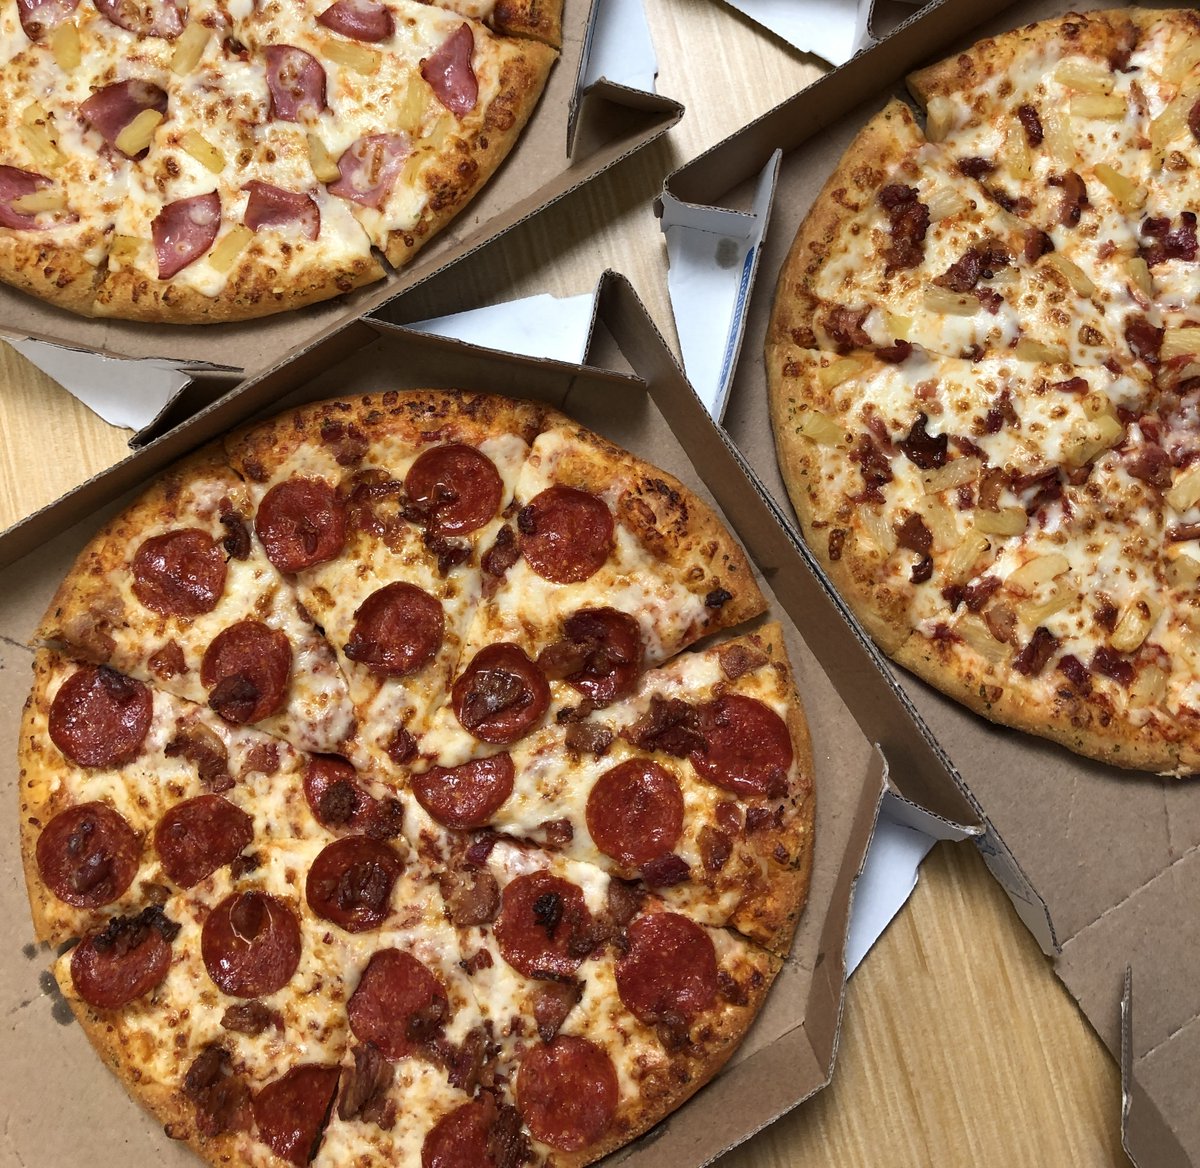 Domino's Pizza on Twitter: "Repeat after me: Let's. 🍕 Get. 🍕 Pizza. 🍕 And try Domino's Carside Delivery™ next time you carryout any 3-Topping pizza for $7.99. / Twitter